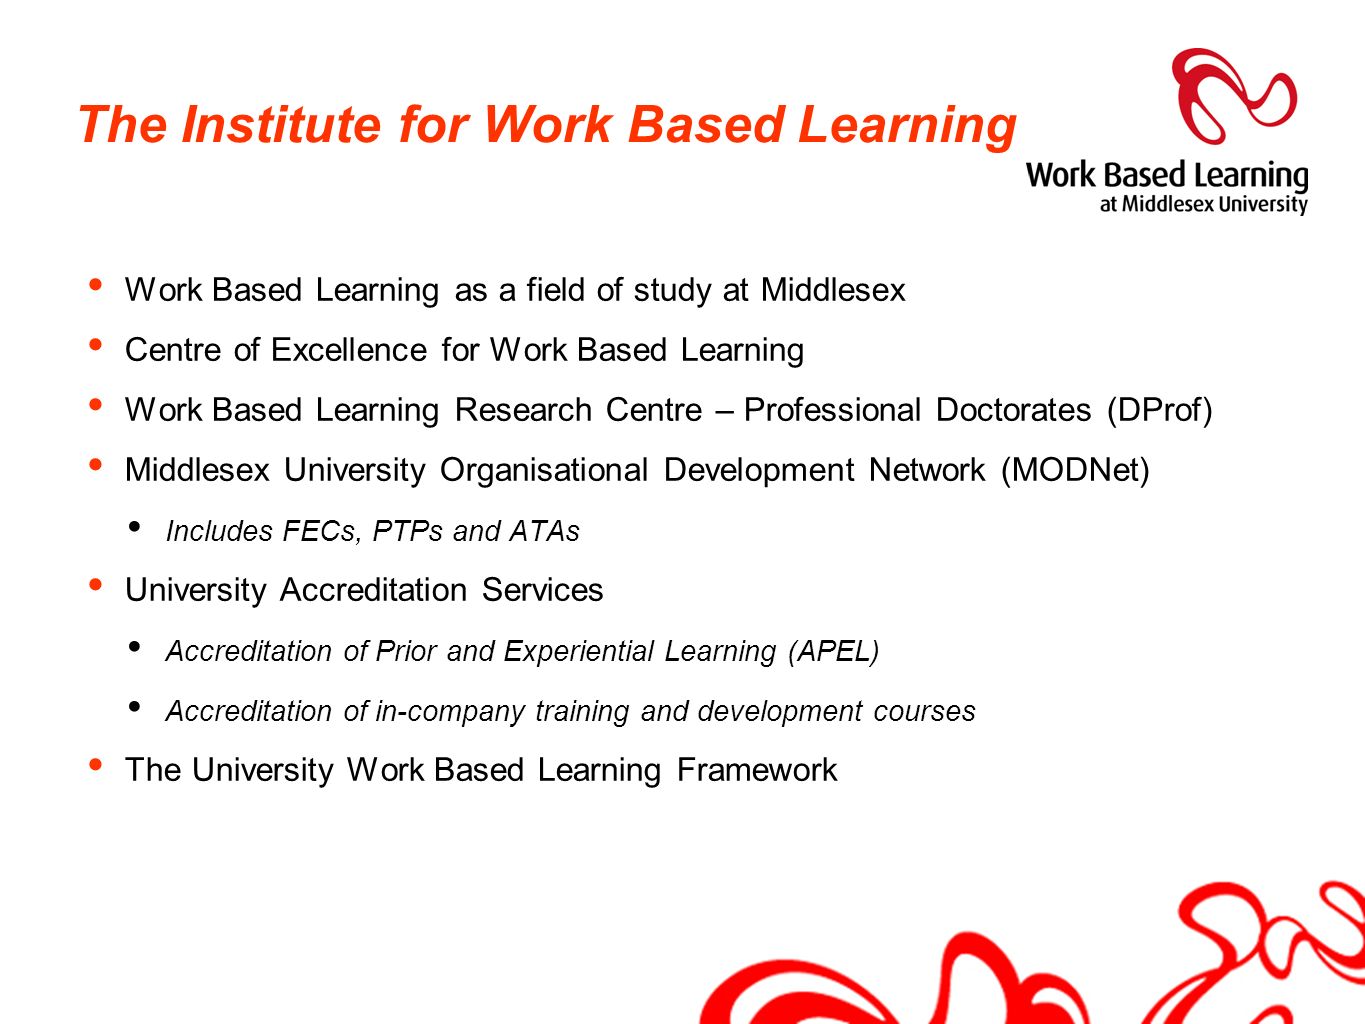 The Institute for Work Based Learning